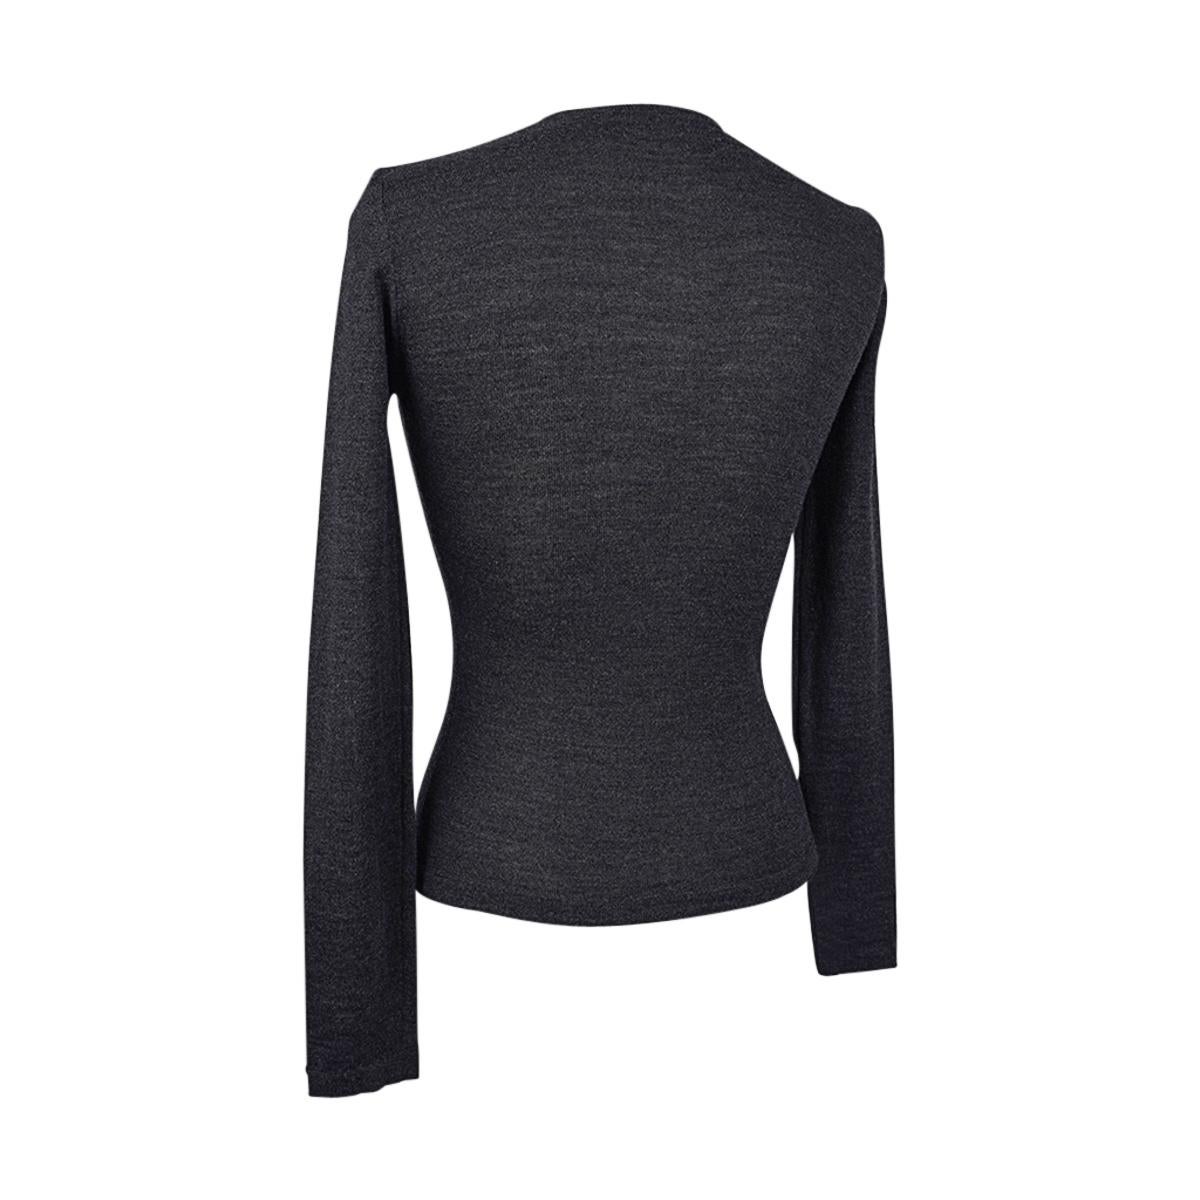 Mugler Vintage Charcoal Gray Knit Top Classic S 3